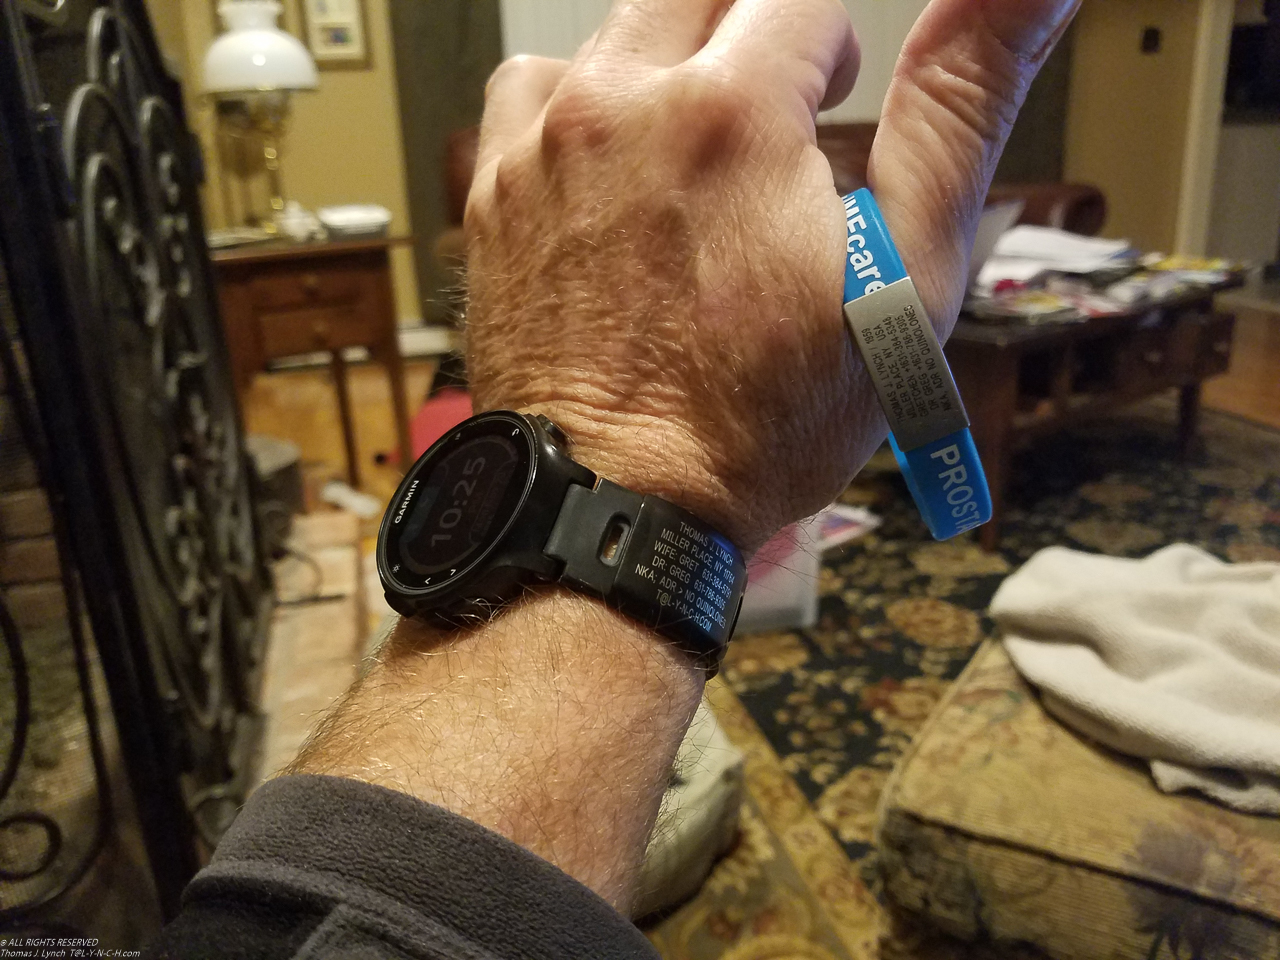 RoadID and Garmin band helper  ~~  this is the caption